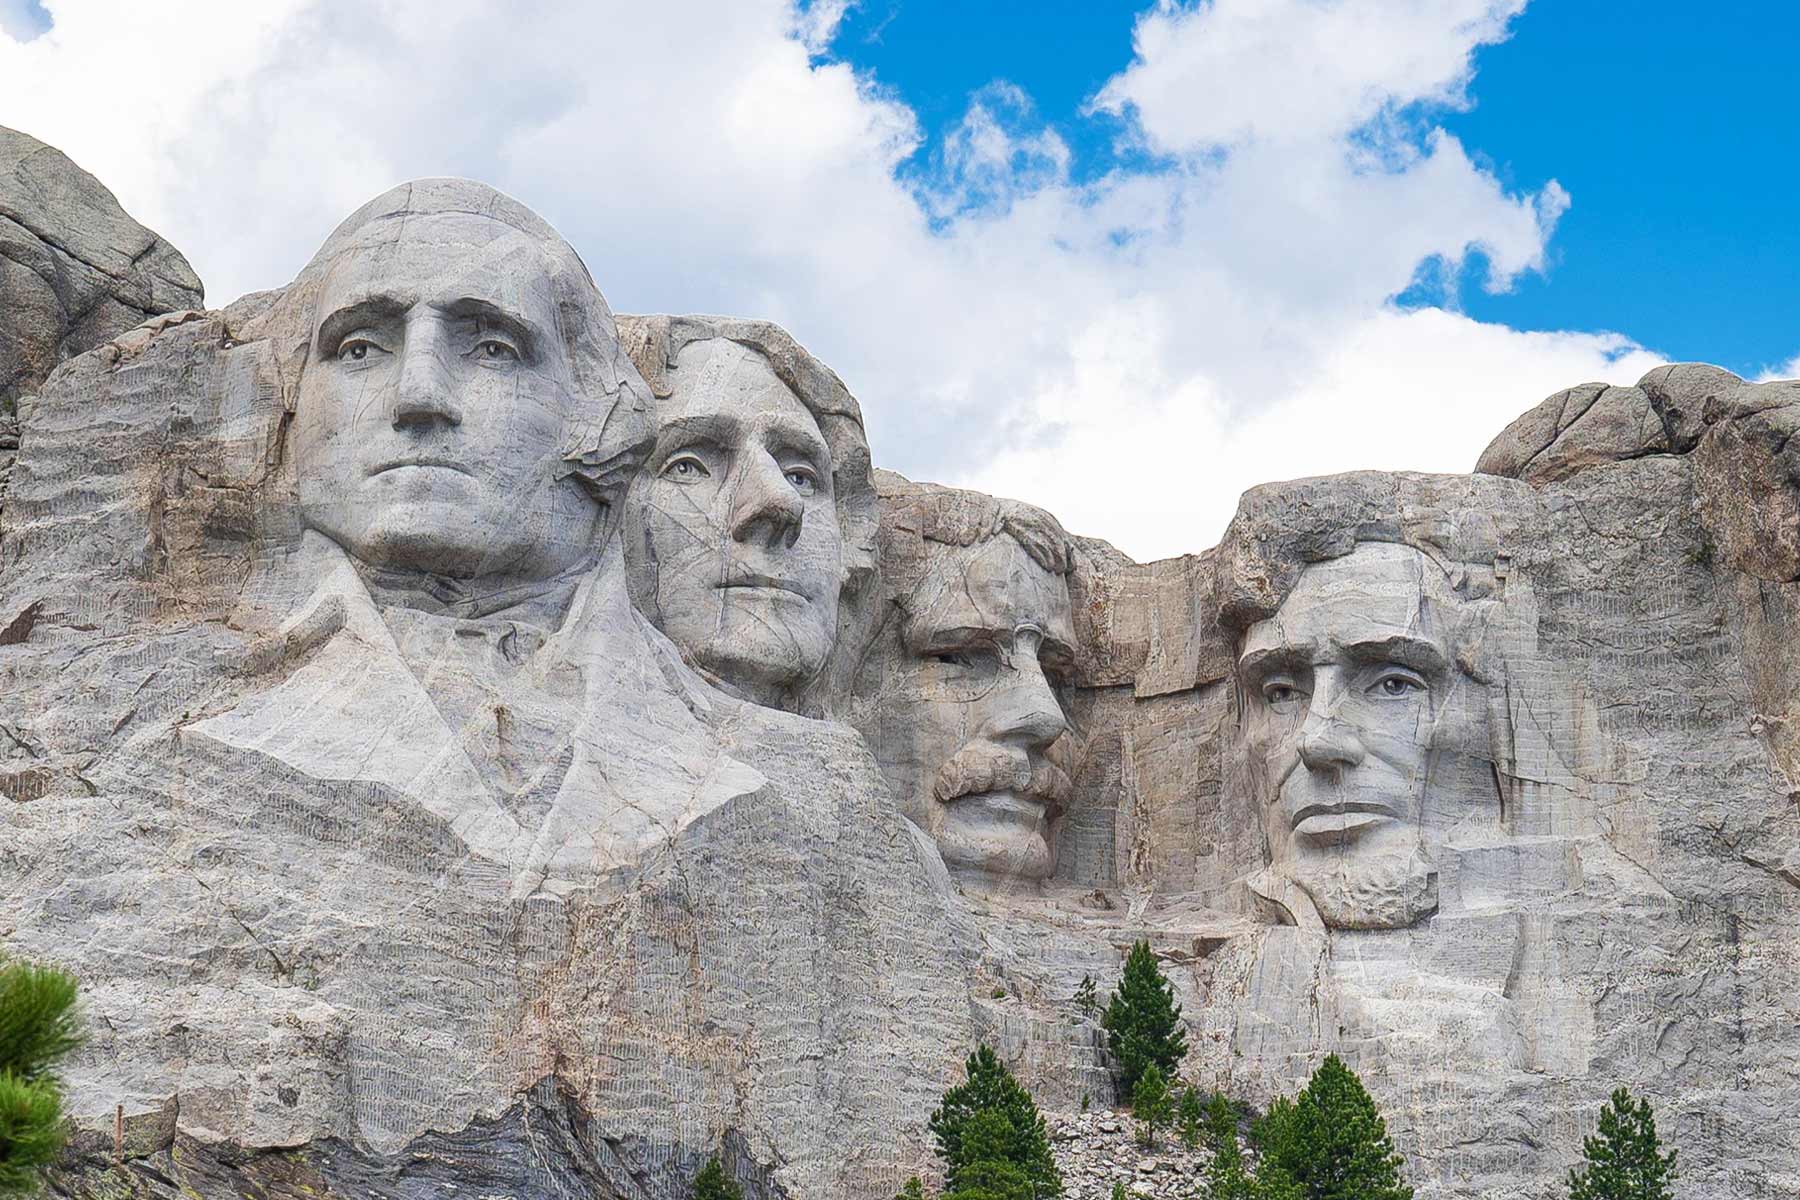 25 EPIC Things to Do Near Mount Rushmore (Helpful Guide + Photos)